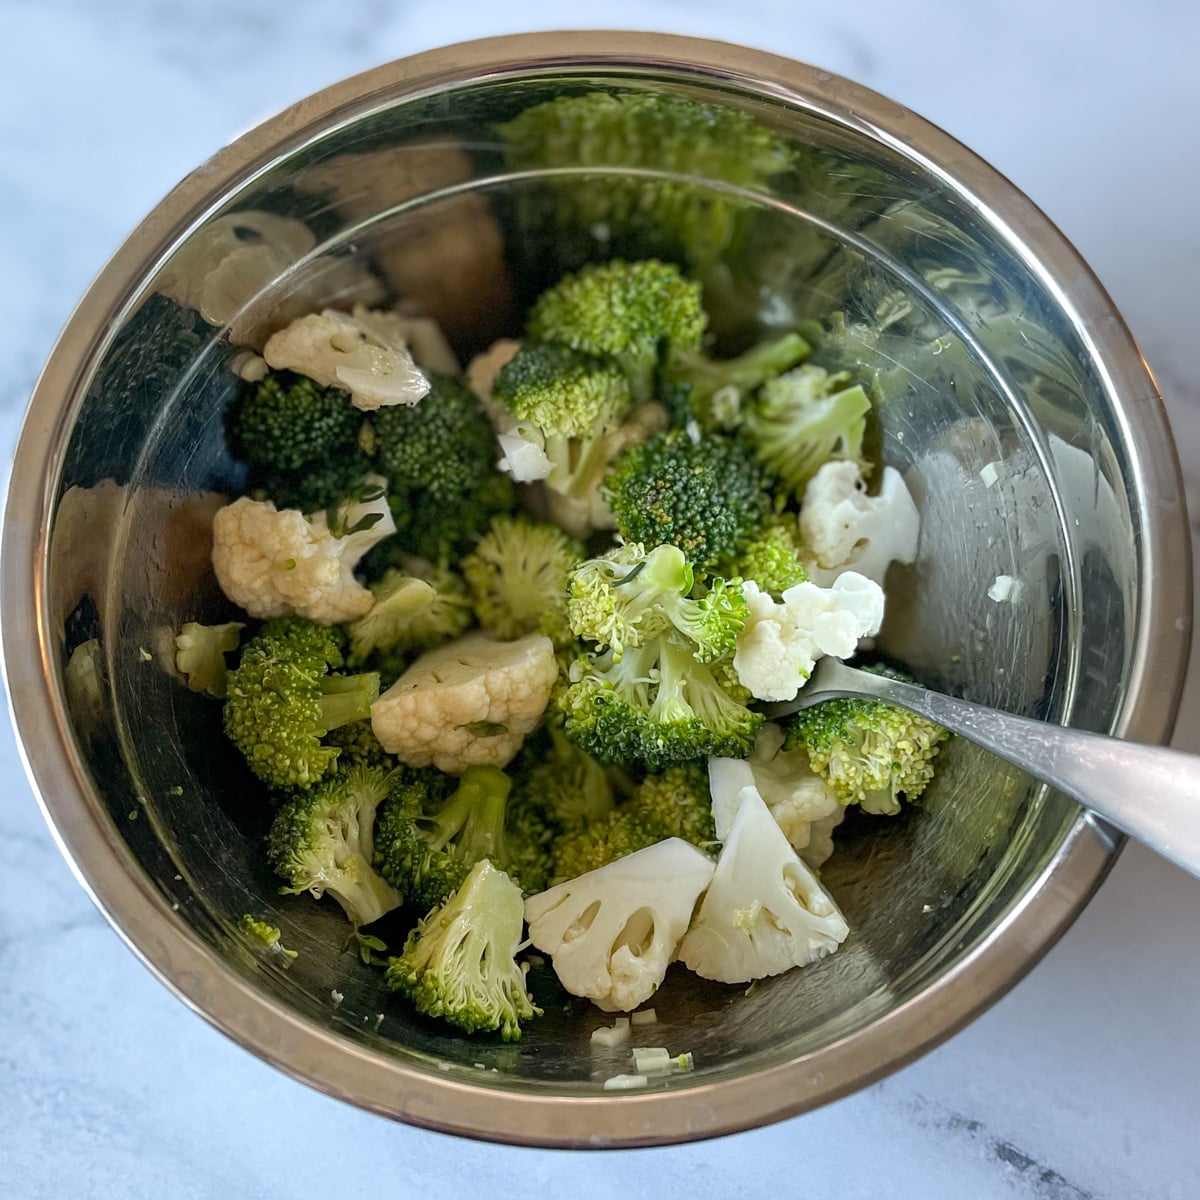 Broccoli and cauliflower coated in lemon garlic thyme vinaigrette are shown in a metal bowl with a fork on a marble counter top.